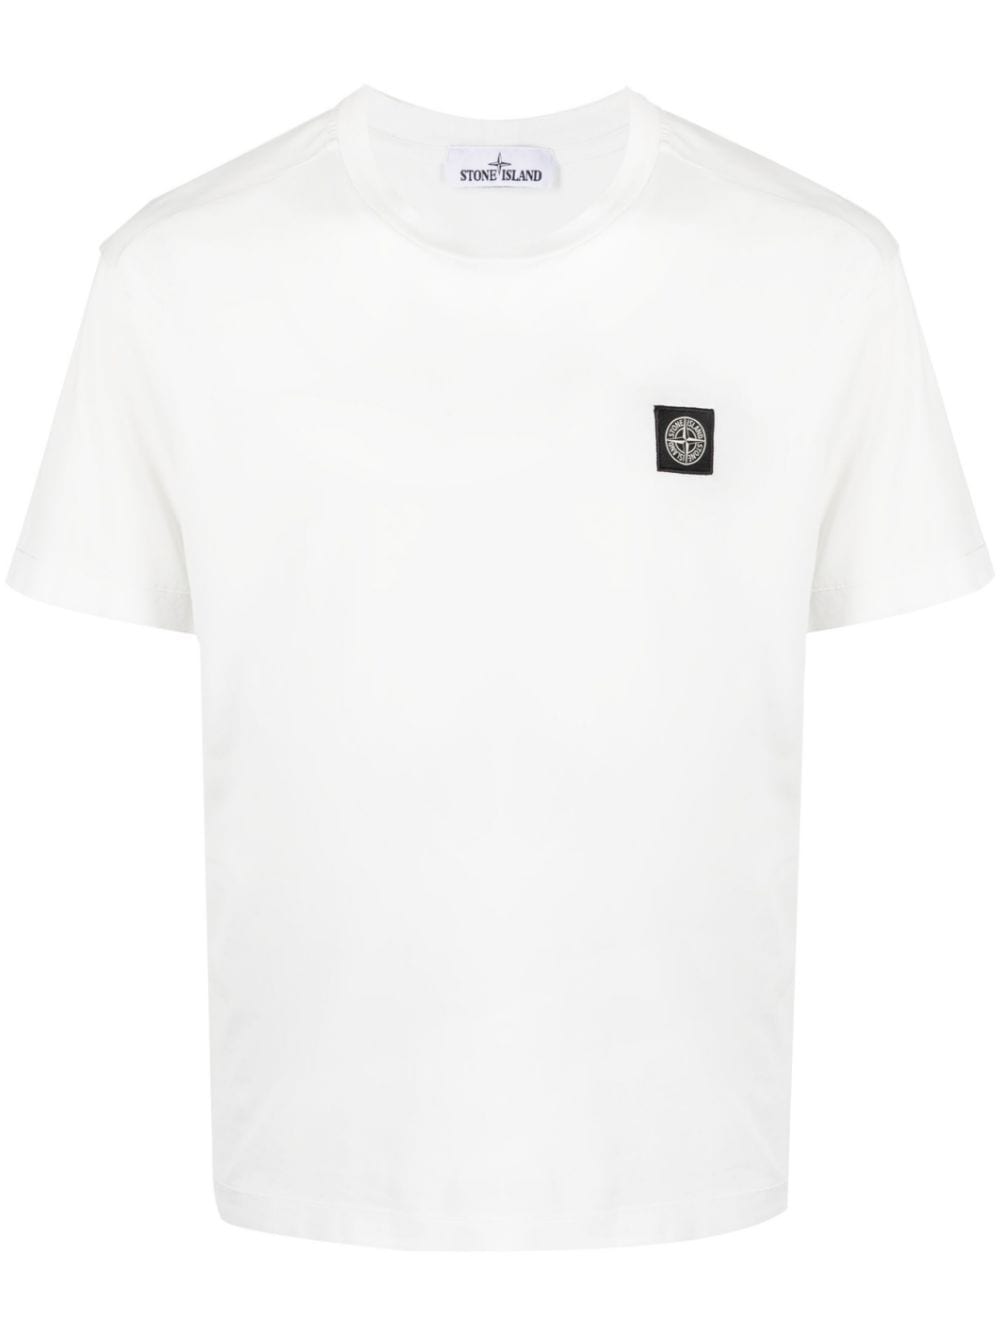 Stone Island T-shirt 24113 60/2 COTTON JERSEY GARMENT DYED Blanc - Lothaire boutiques